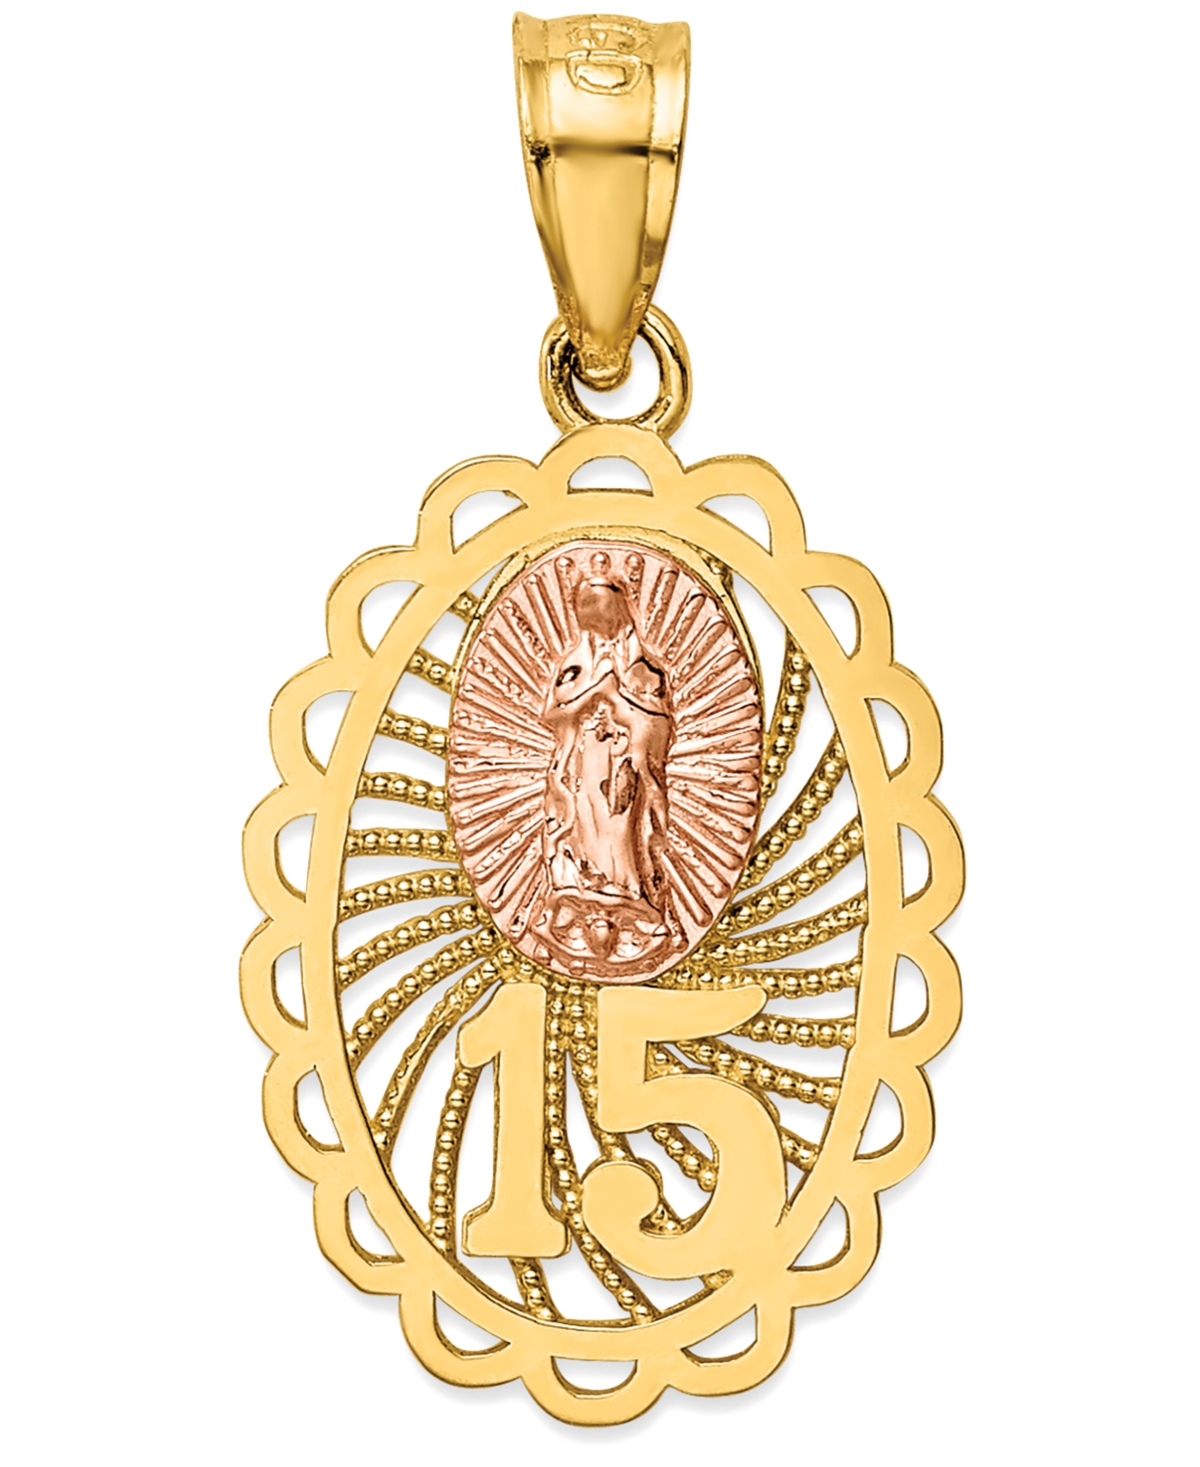 15 Our Lady of Guadeloupe Two-Tone Charm Pendant in 14k Yellow & Rose Gold - Yellow/Rose Gold